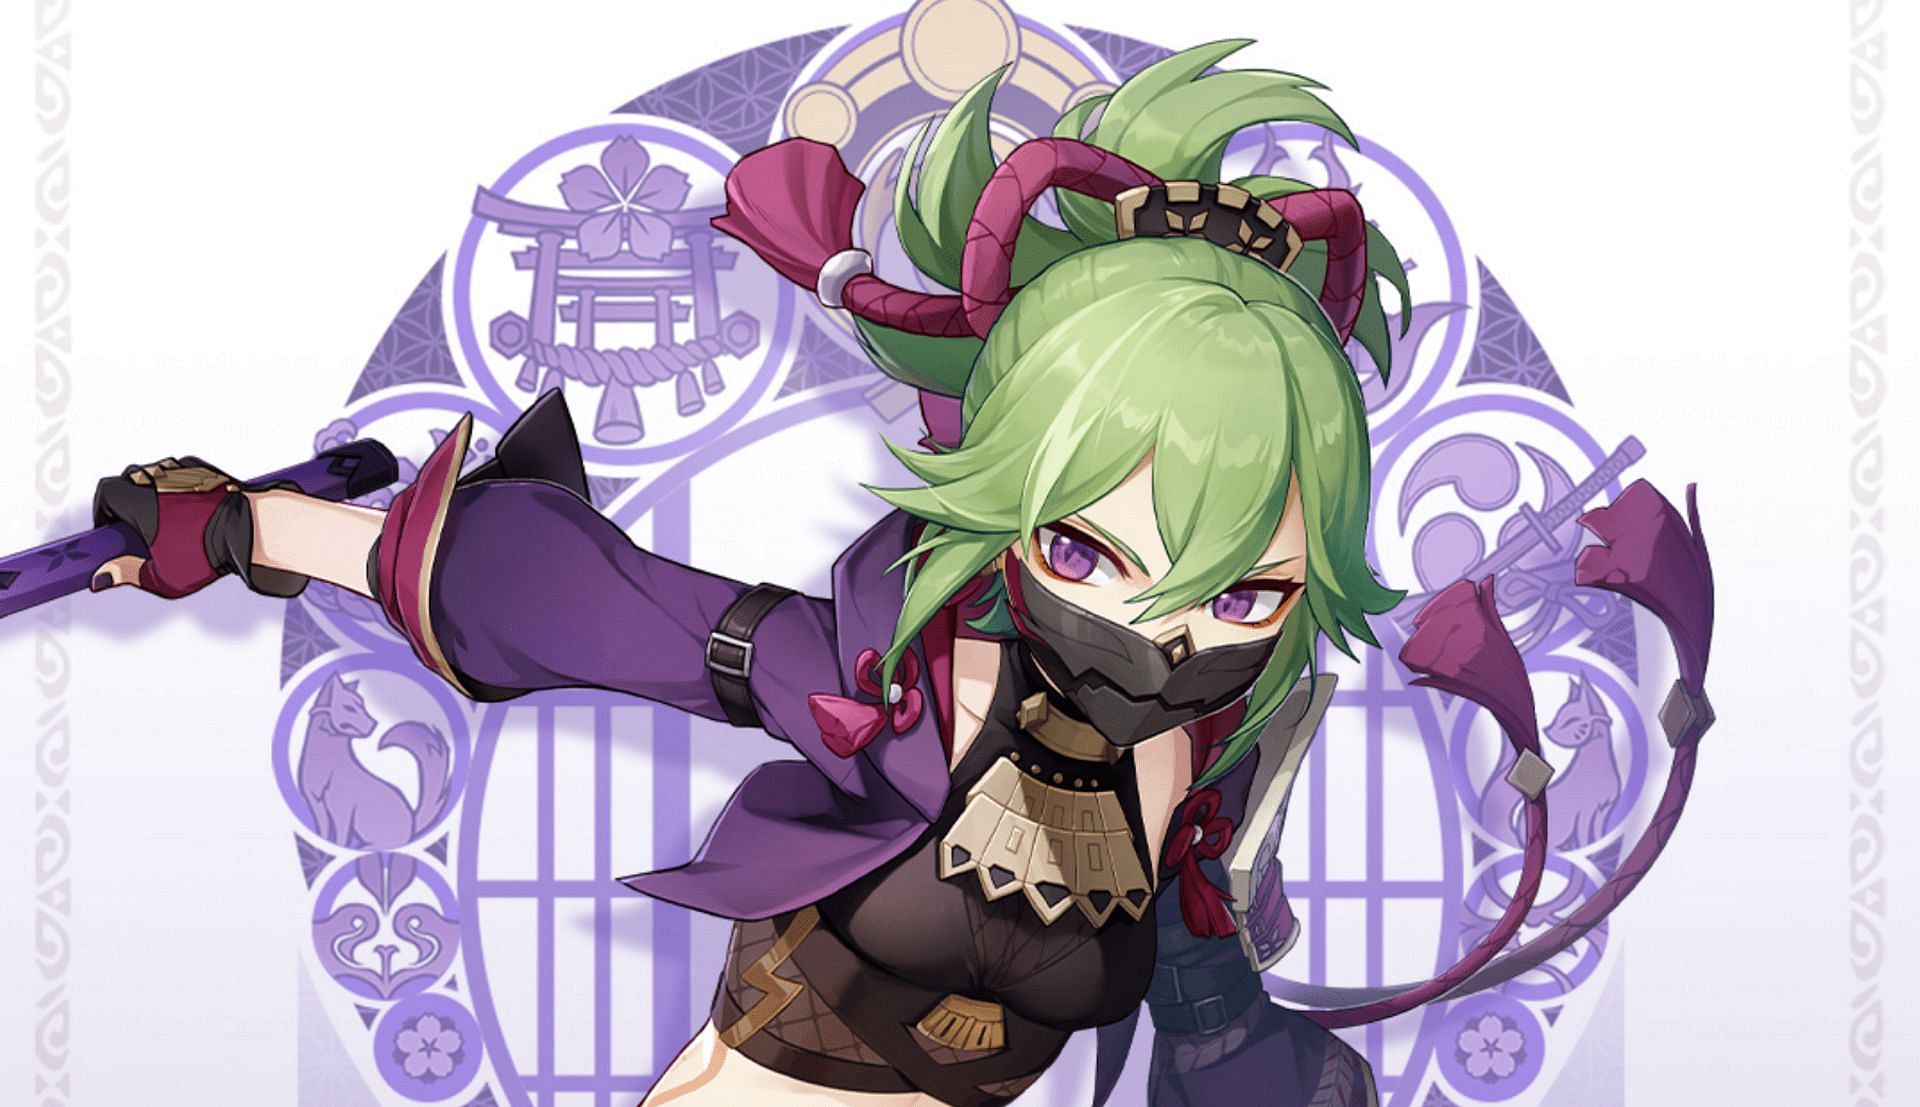 Kuki Shinobu is a new 4-star character who manages different aspects of the Arataki Gang behind the scenes (Image via Genshin Impact)